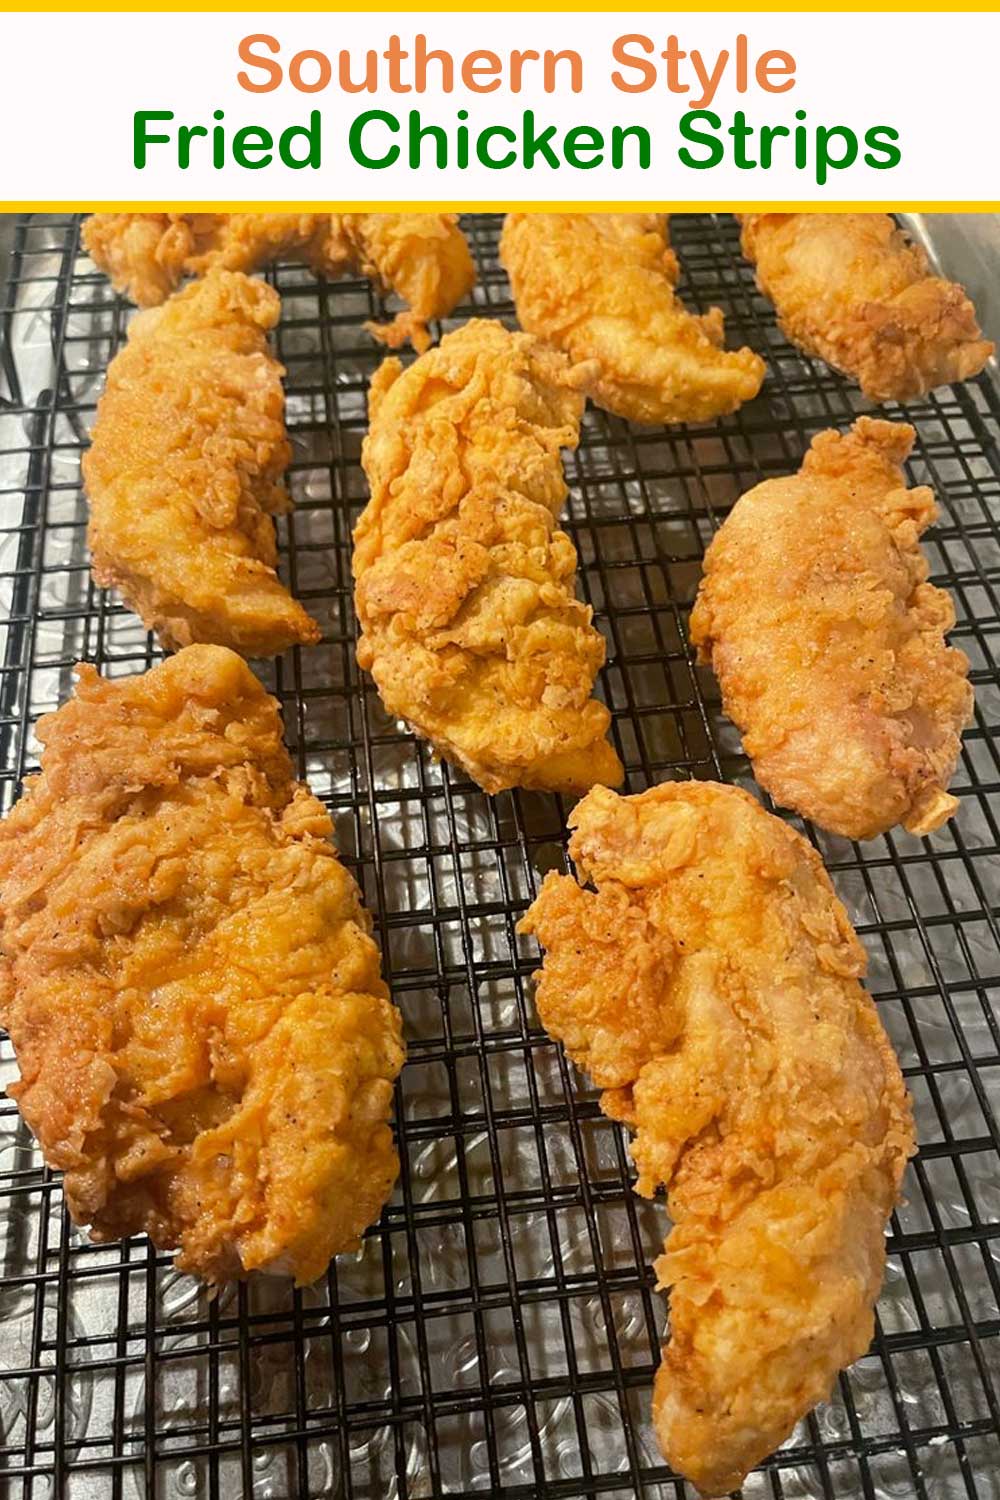 Southern Style Fried Chicken Strips